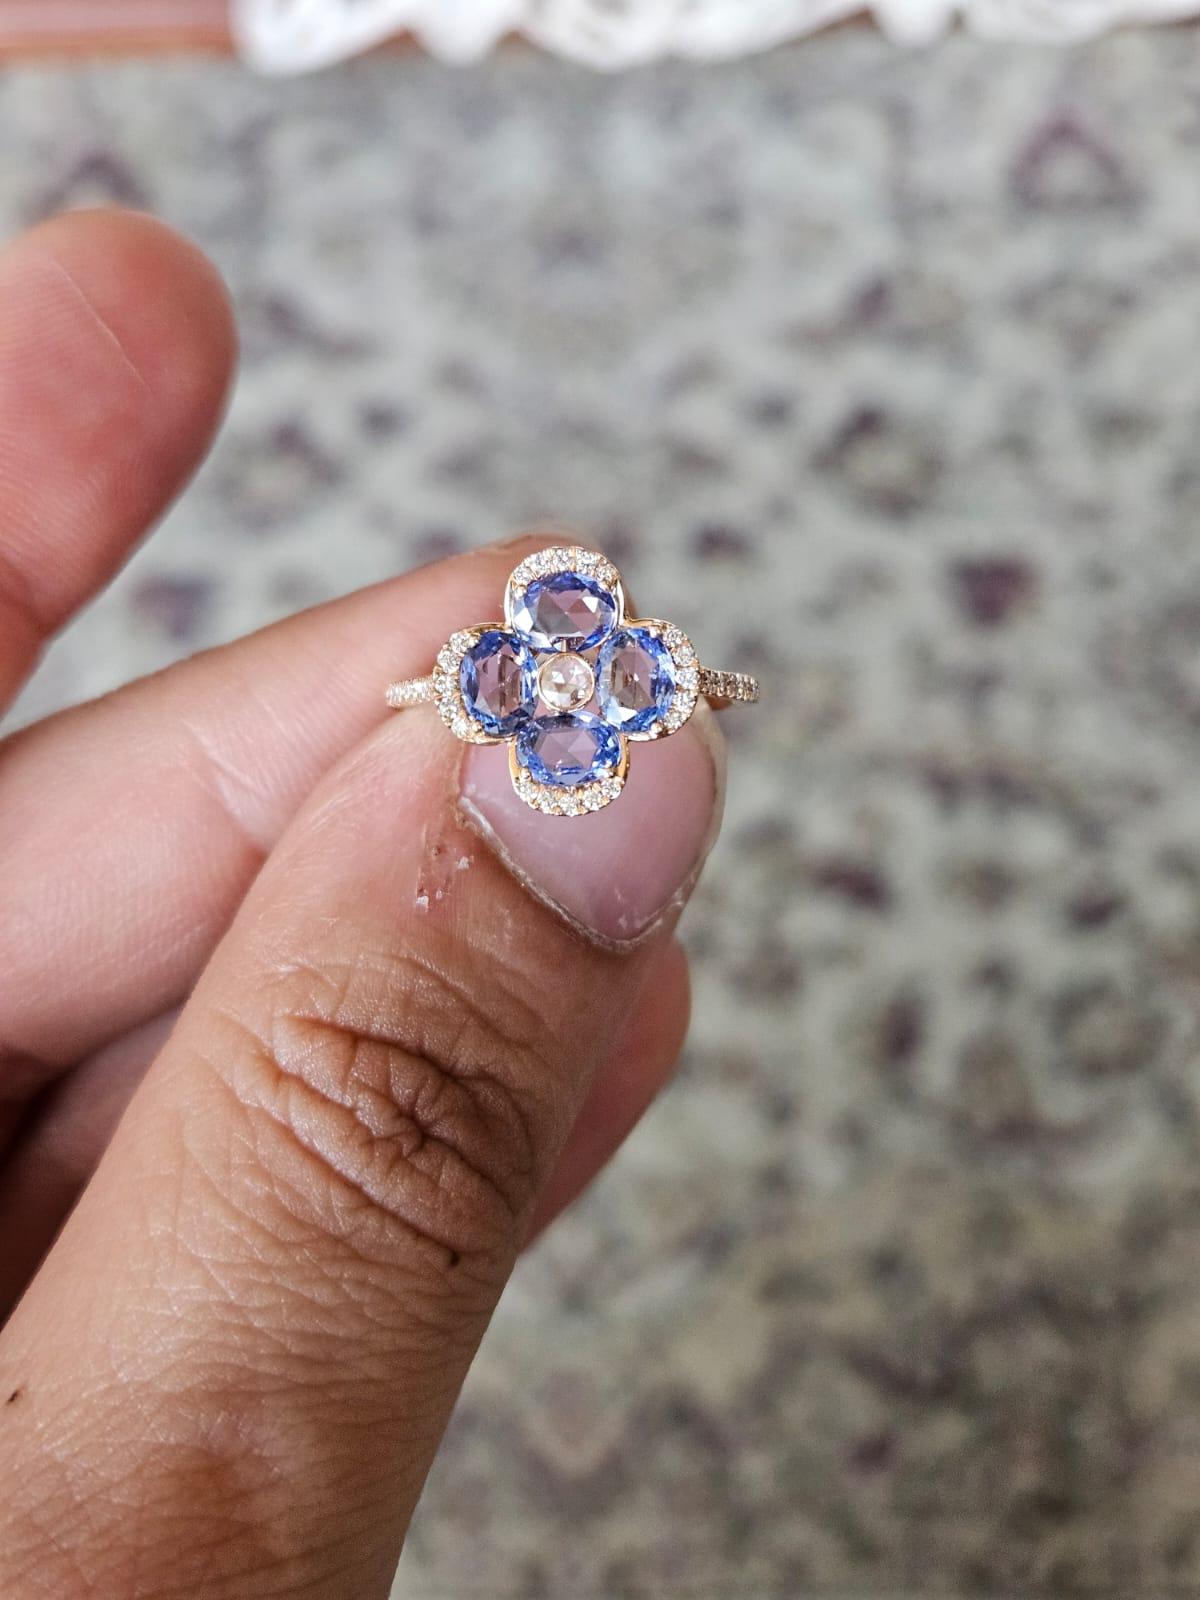 A very beautiful & gorgeous, modern style, Blue Sapphires Engagement Ring set in 18K Rose Gold & Diamonds. The weight of the Blue Sapphire Rose Cuts is 1.62 carats. The Blue Sapphires are of Ceylon (Sri Lanka) origin. The Diamonds weight is 0.20